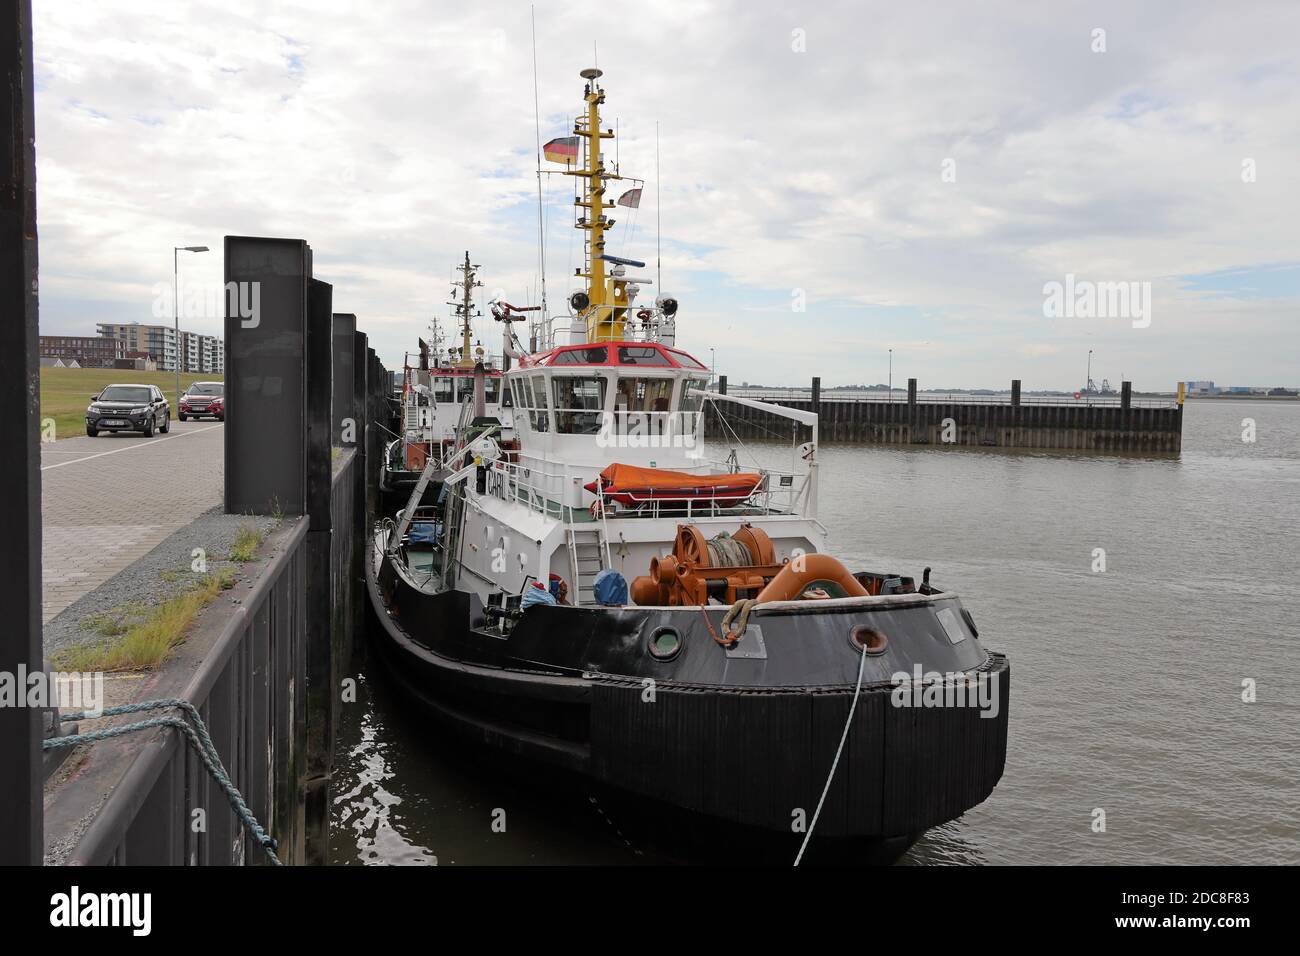 The harbor tug Carl will be in the port of Bremerhaven on August 20, 2020. Stock Photo